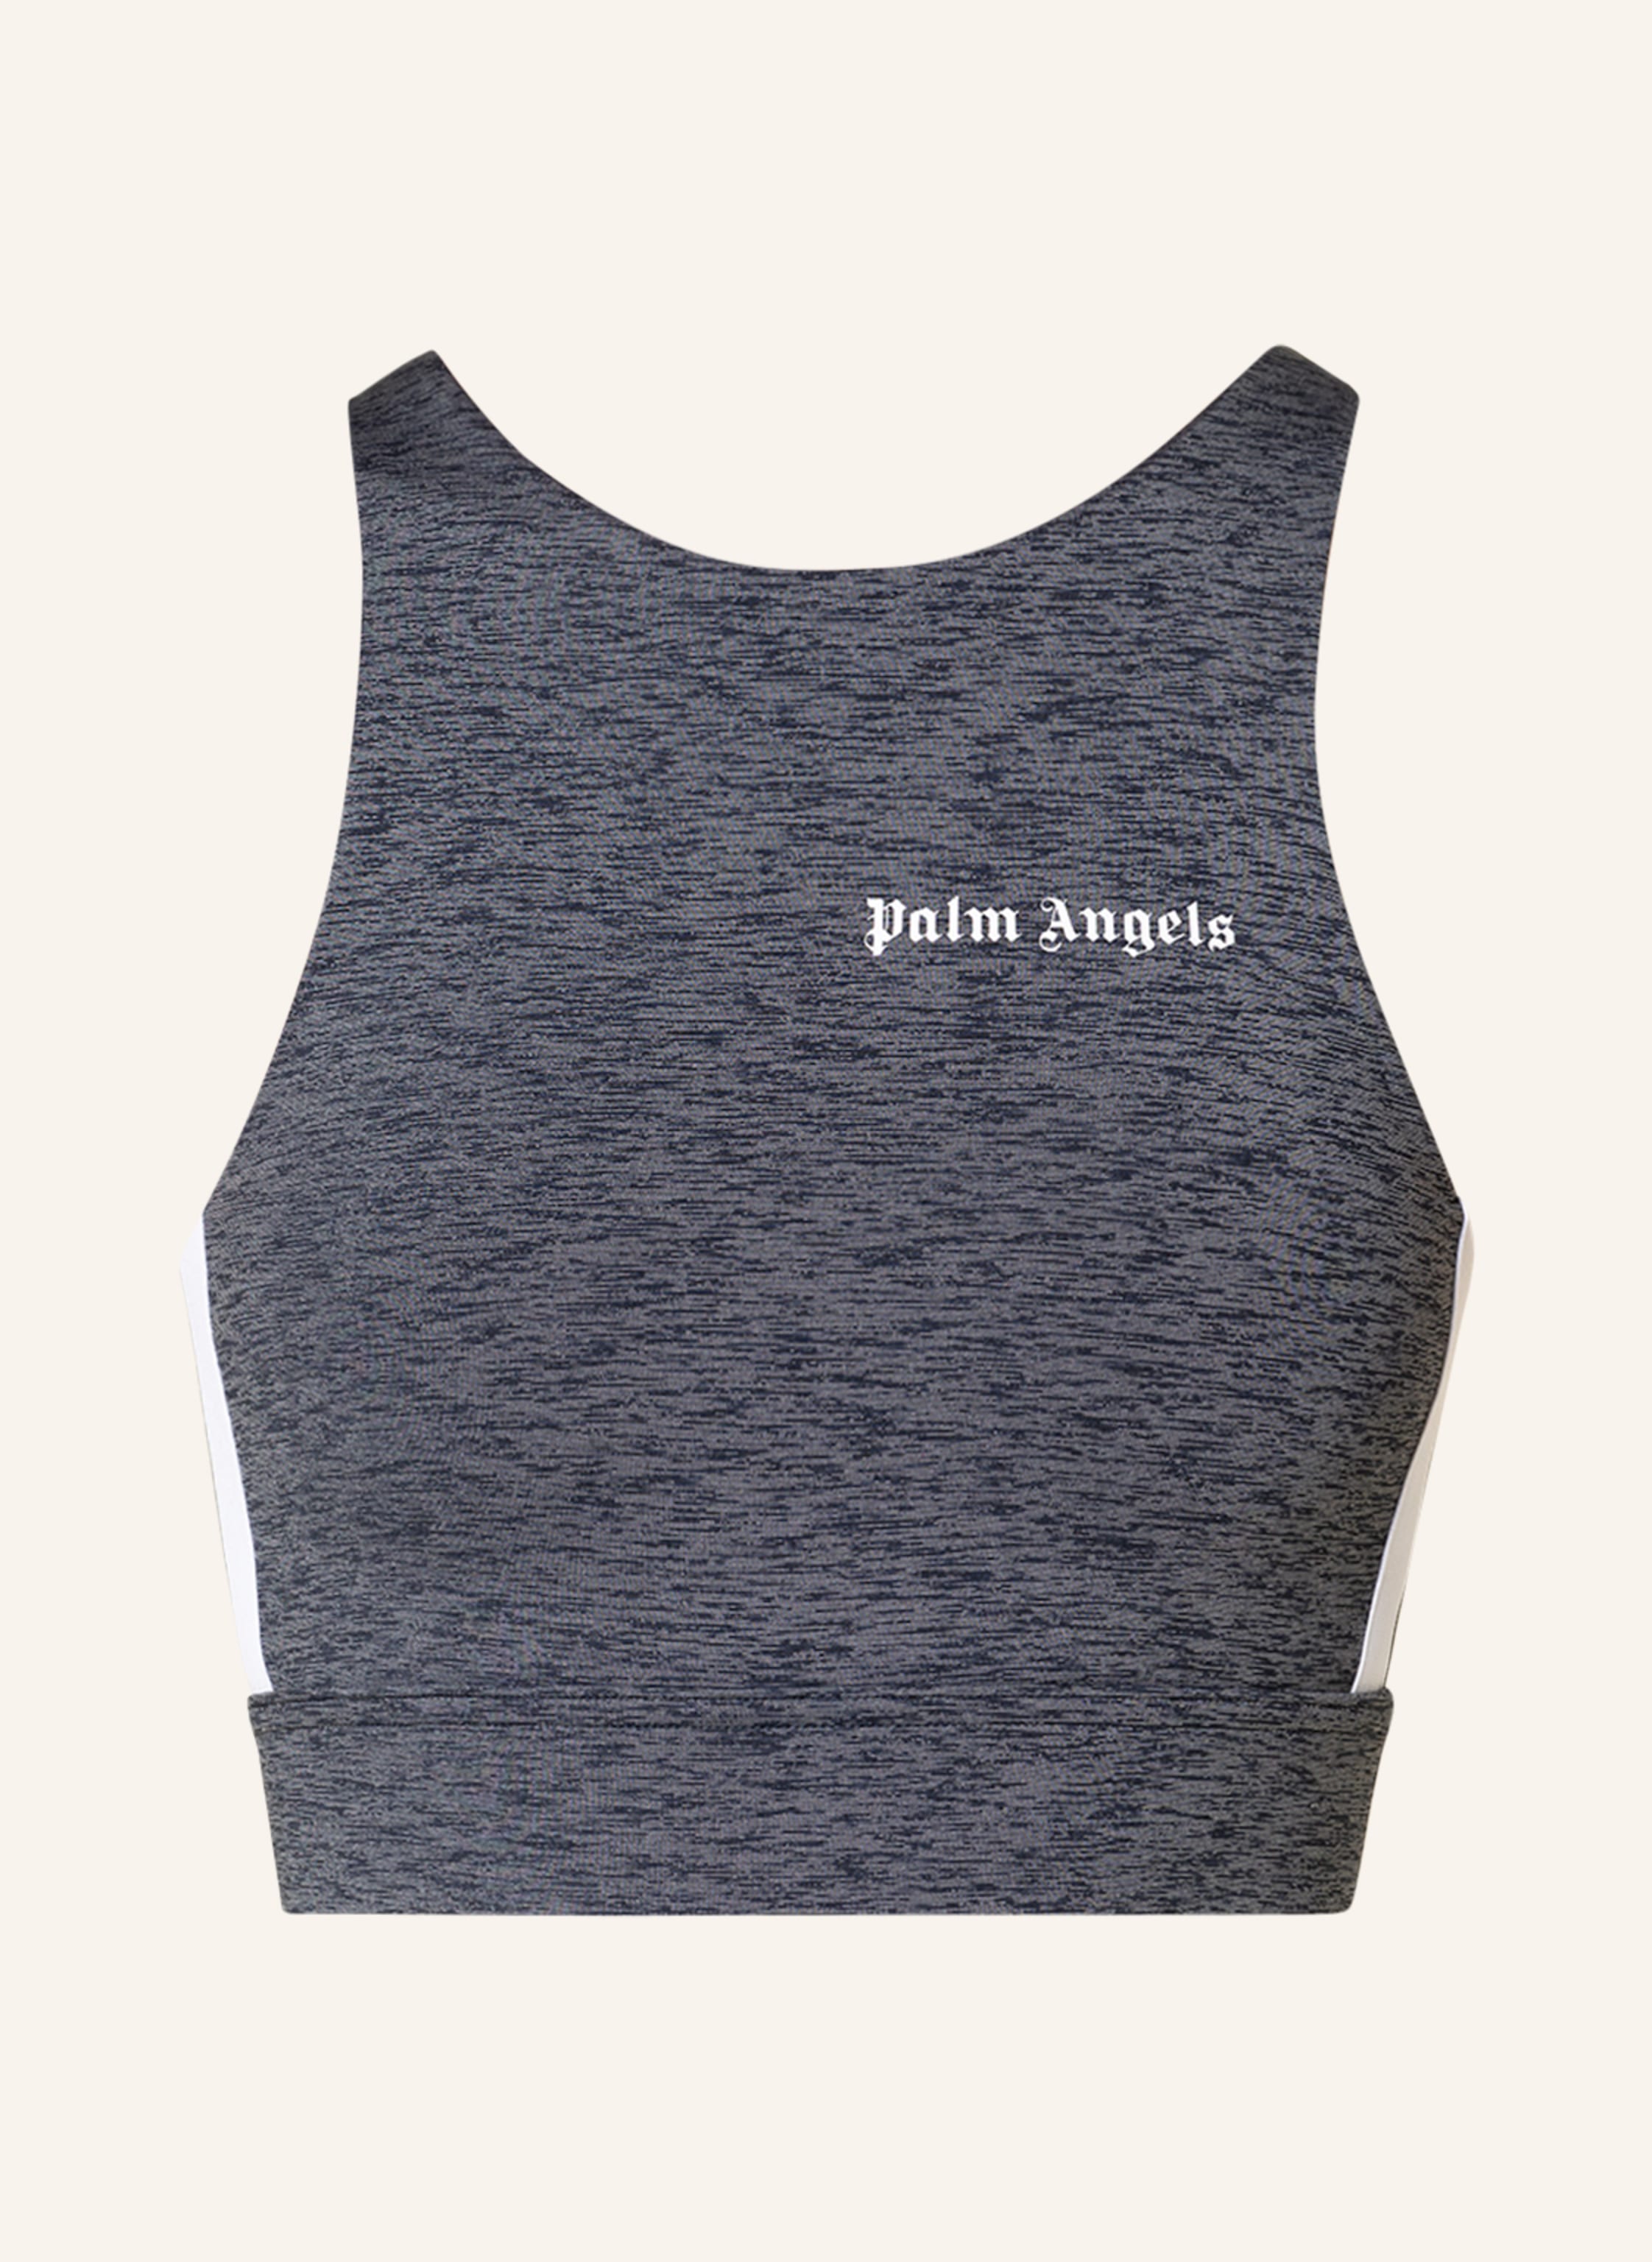 Palm Angels Cropped top in gray/ dark blue